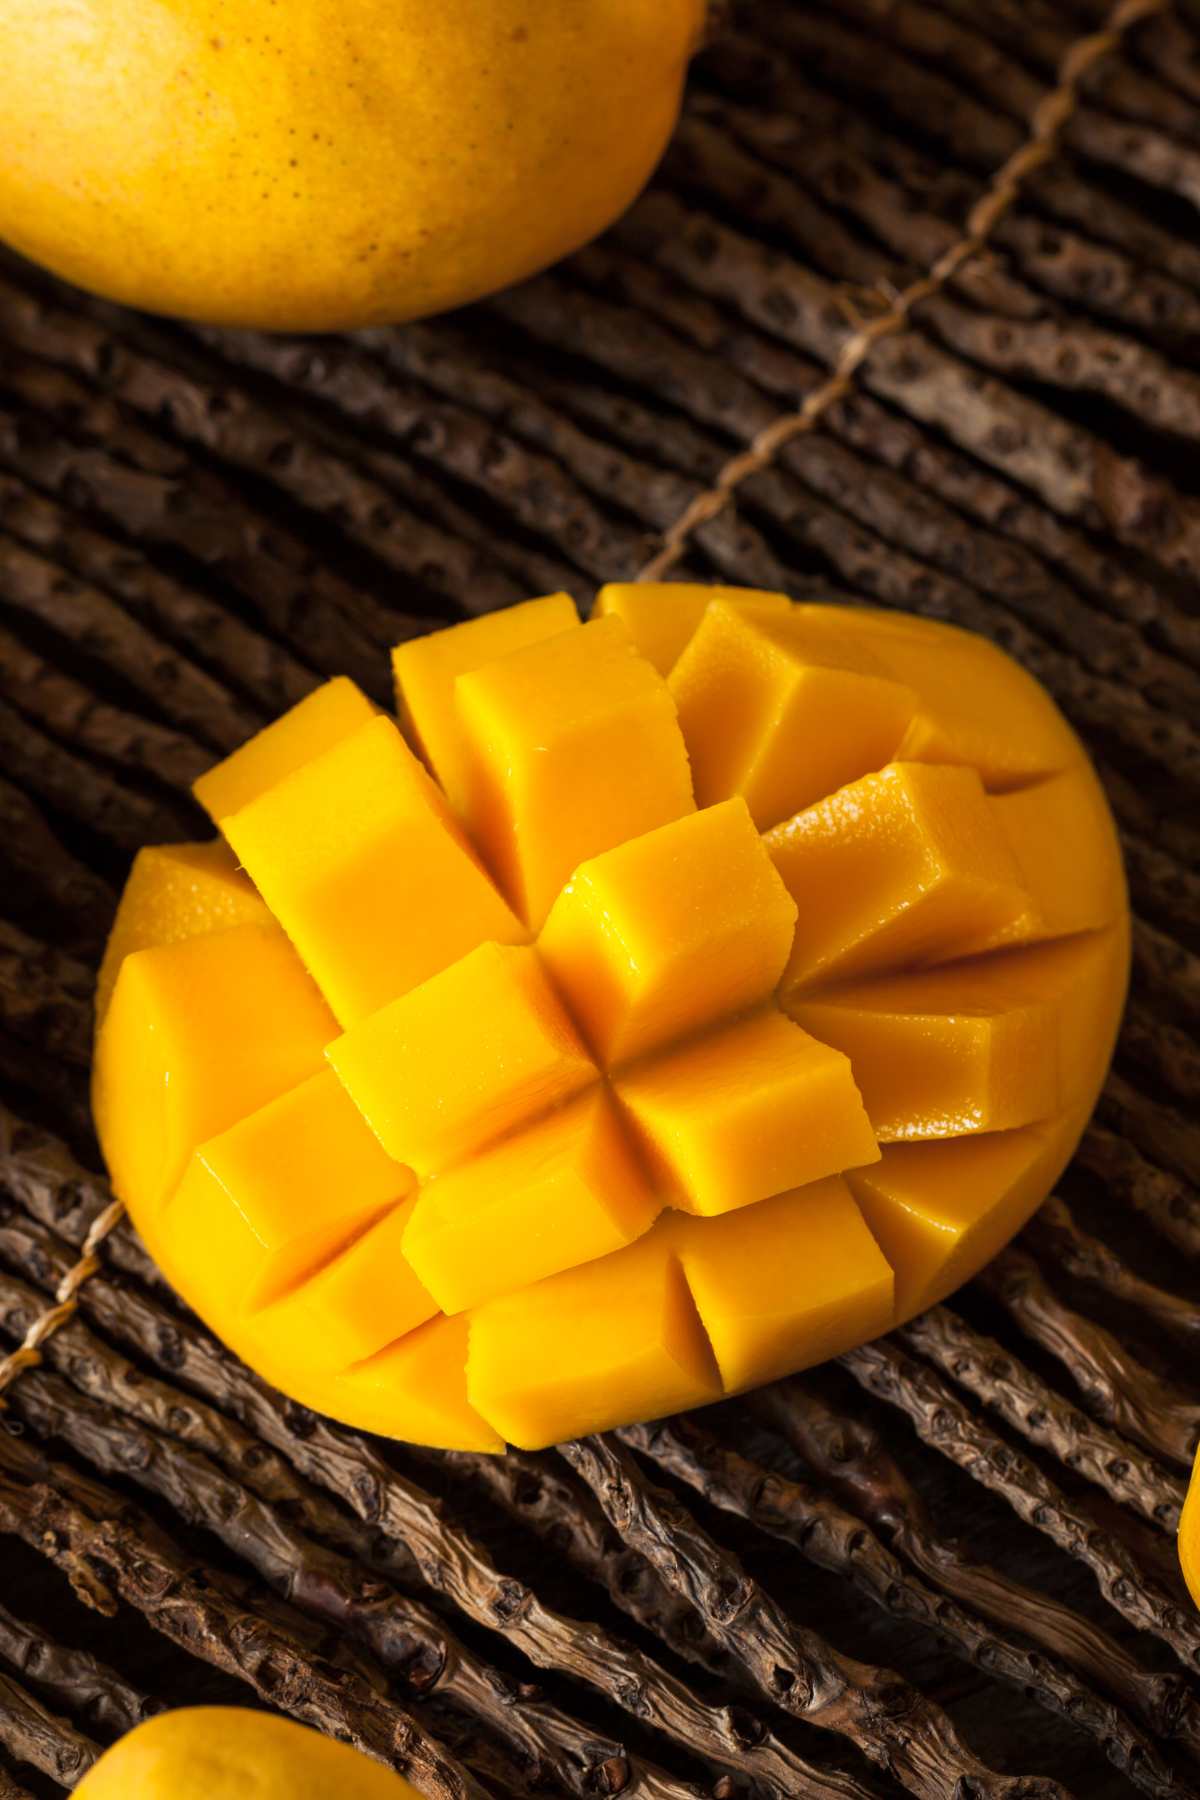 Mango is a sweet and delicious fruit that is enjoyed around the world. But for those on a keto diet, you may be wondering if mango is keto-friendly. Here's what you need to know about mango and its carb content.